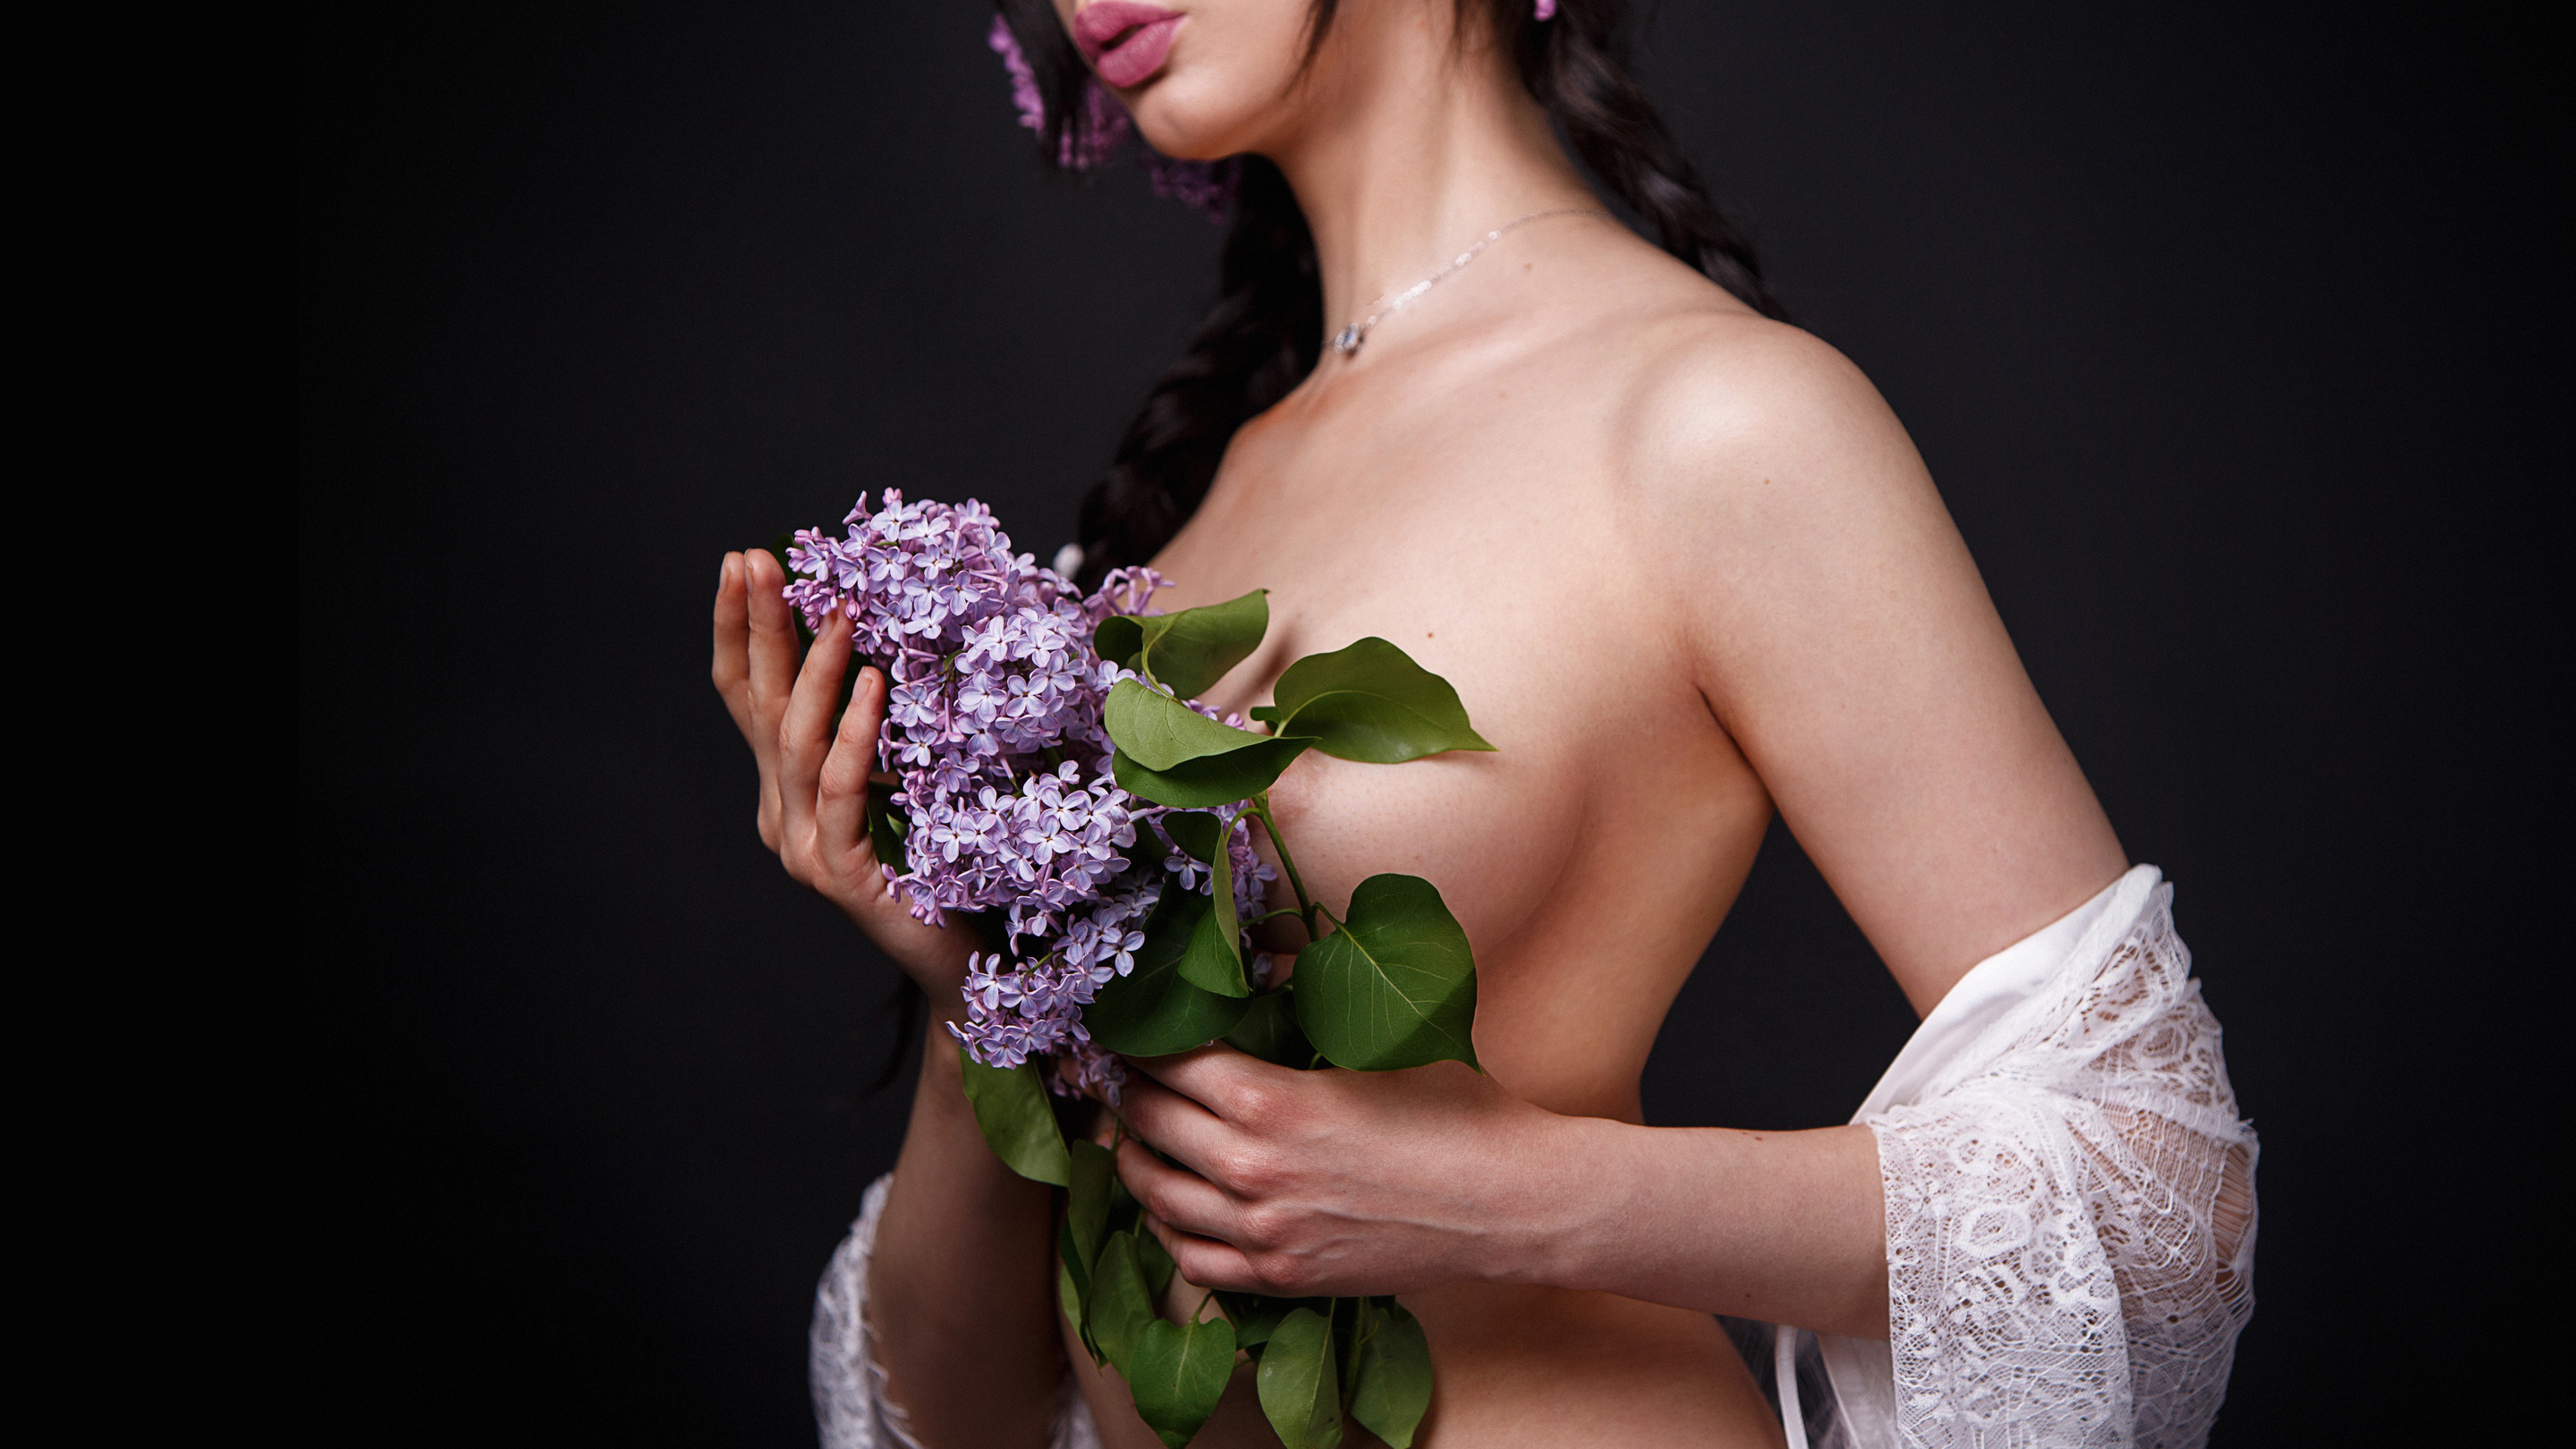 Free photo The girl covered her naked breasts with a bouquet of lilacs.